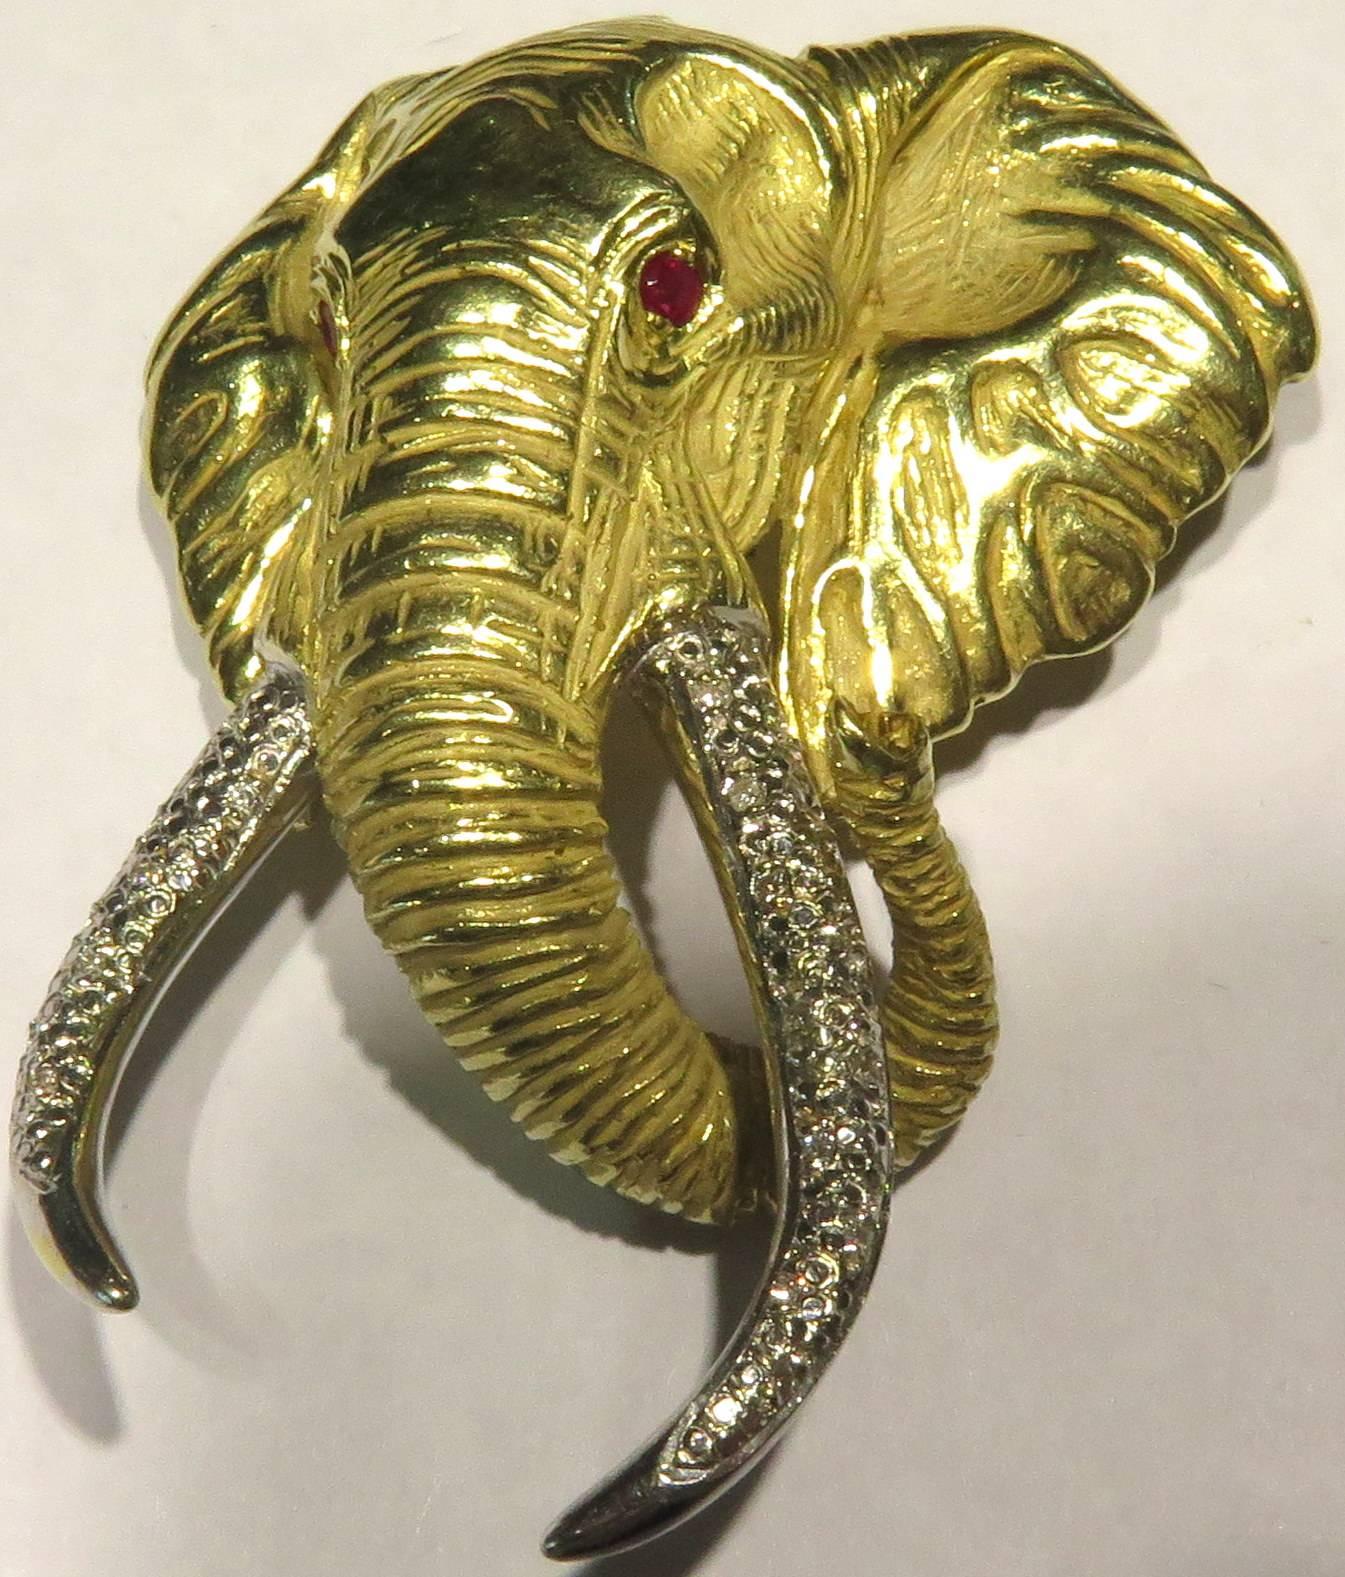 This incredible elephant pin / pendant is a very impressive size. It is signed JOAO and another mark with the 14ct mark that I can't make out *see image 5. The tusks are in white gold with pave' diamonds and the eyes each contain a ruby.
This